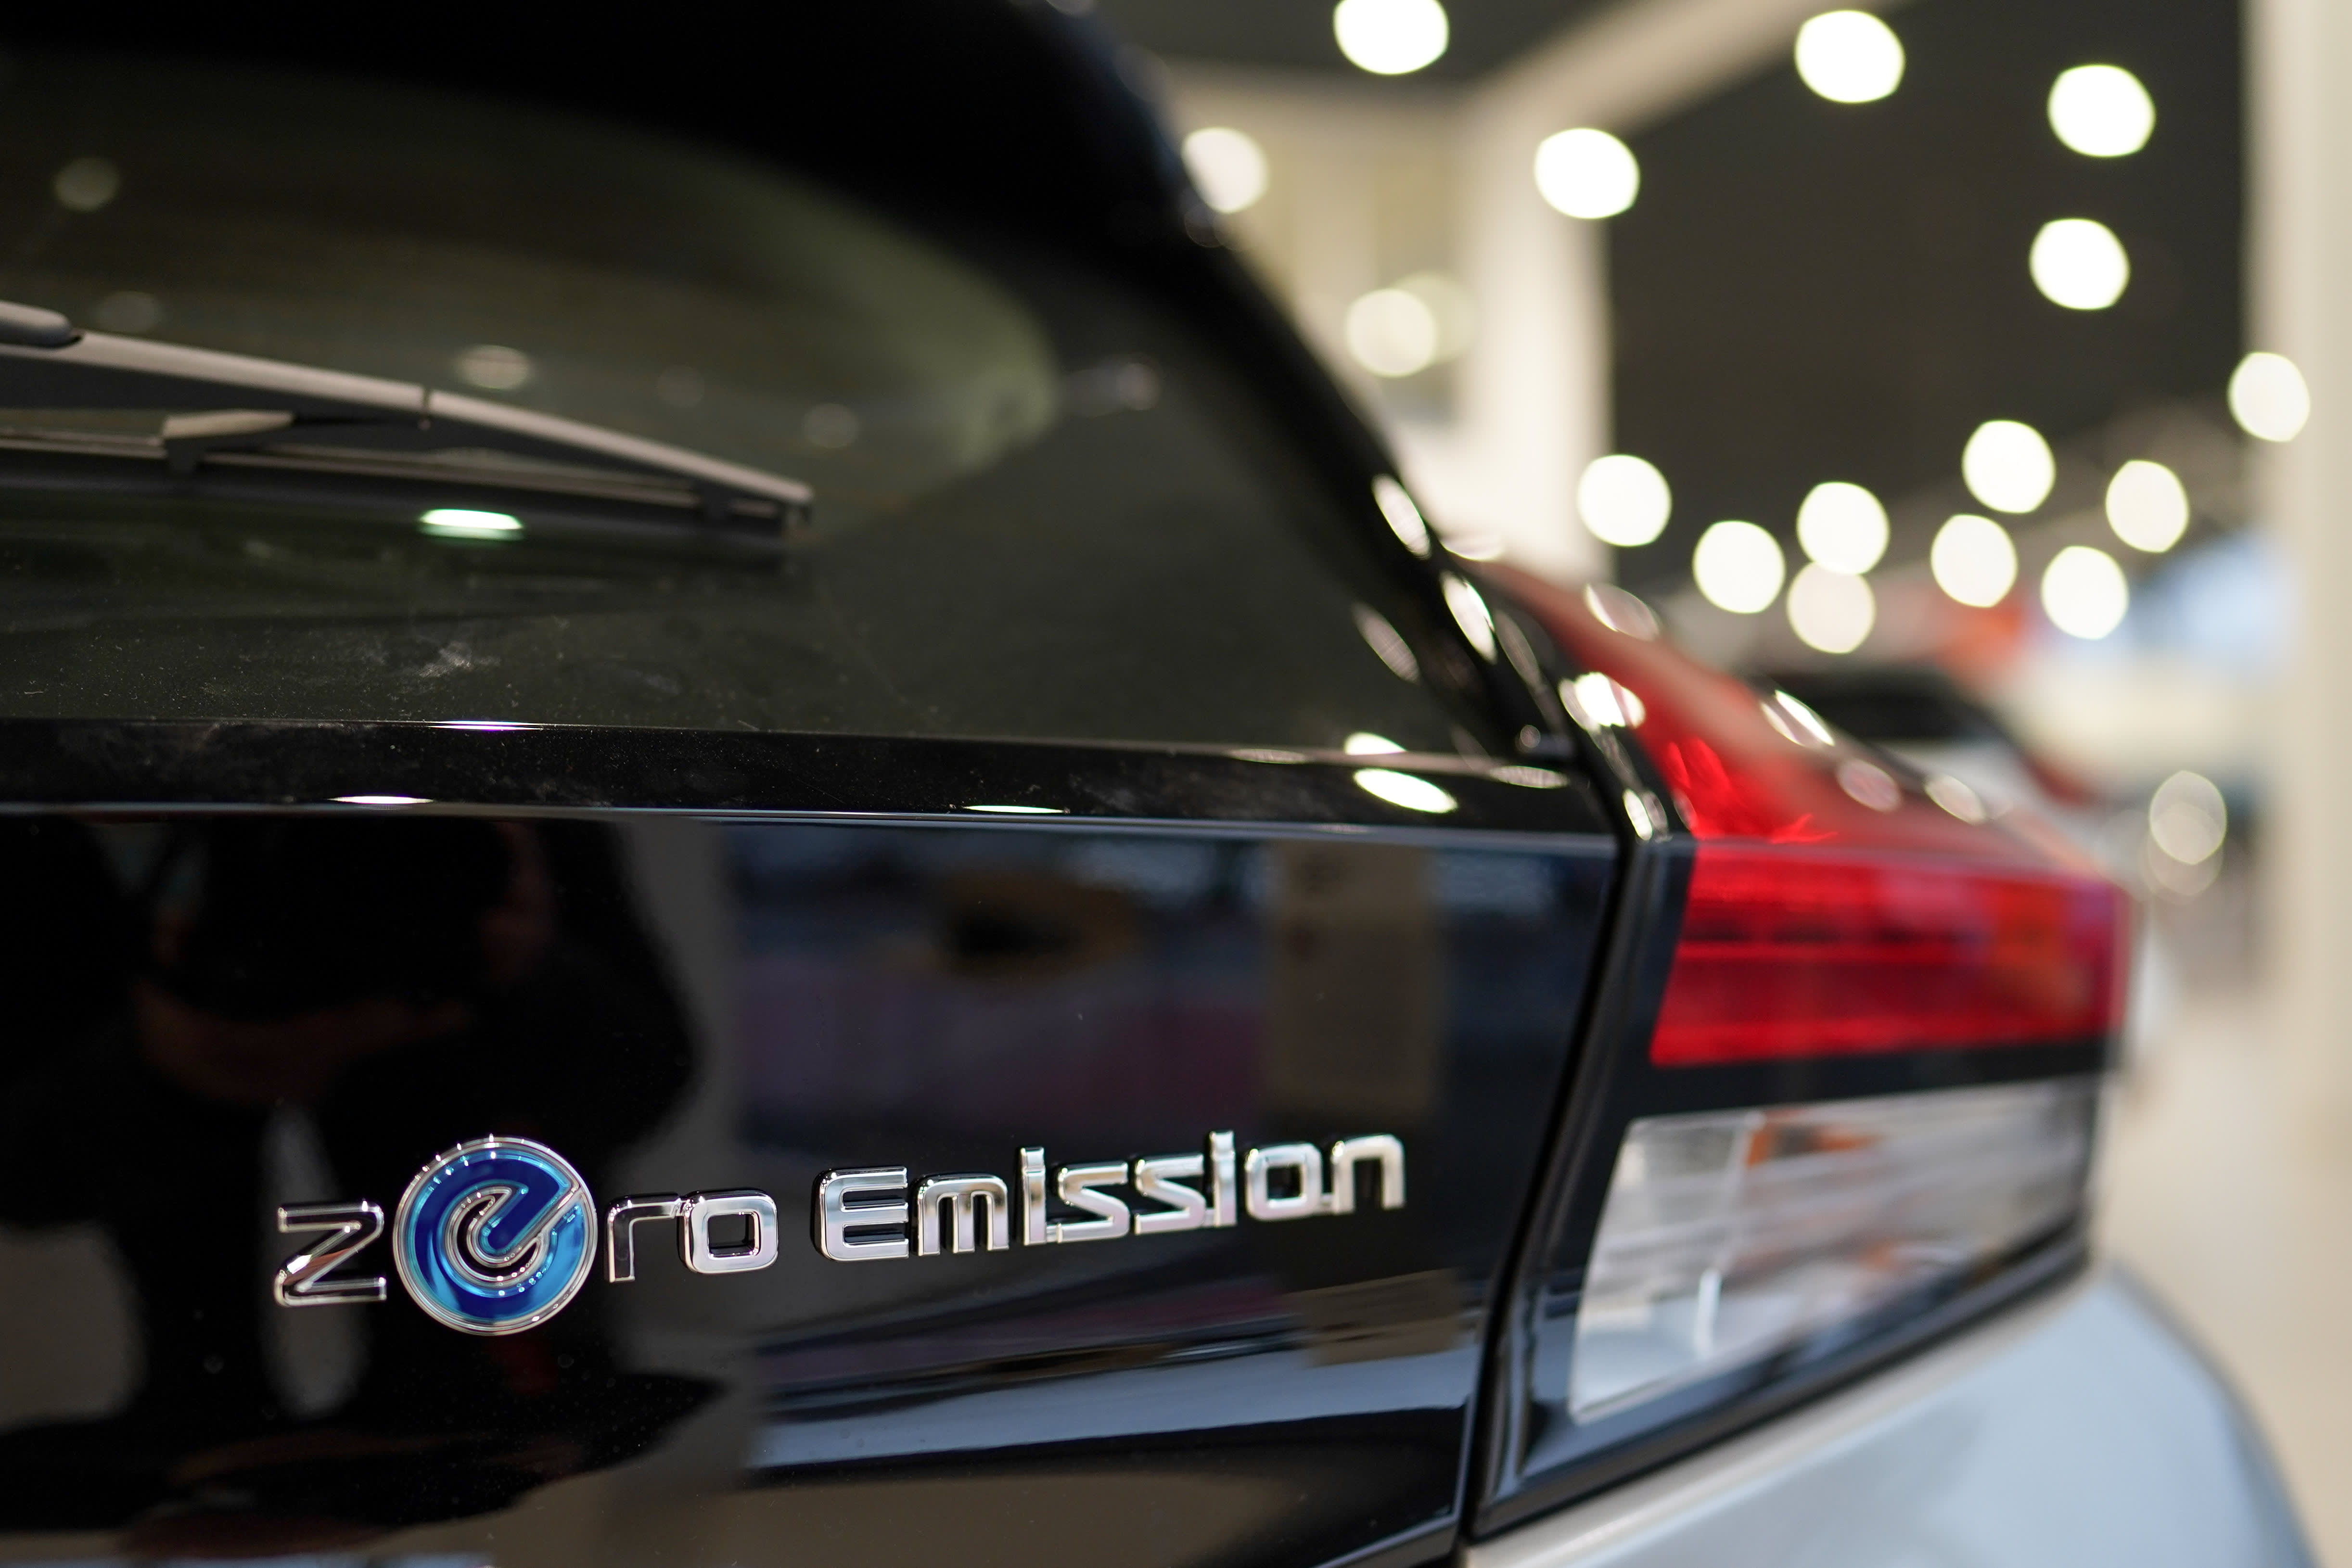 The auto industry ‘has to move’ on electrification, sustainability